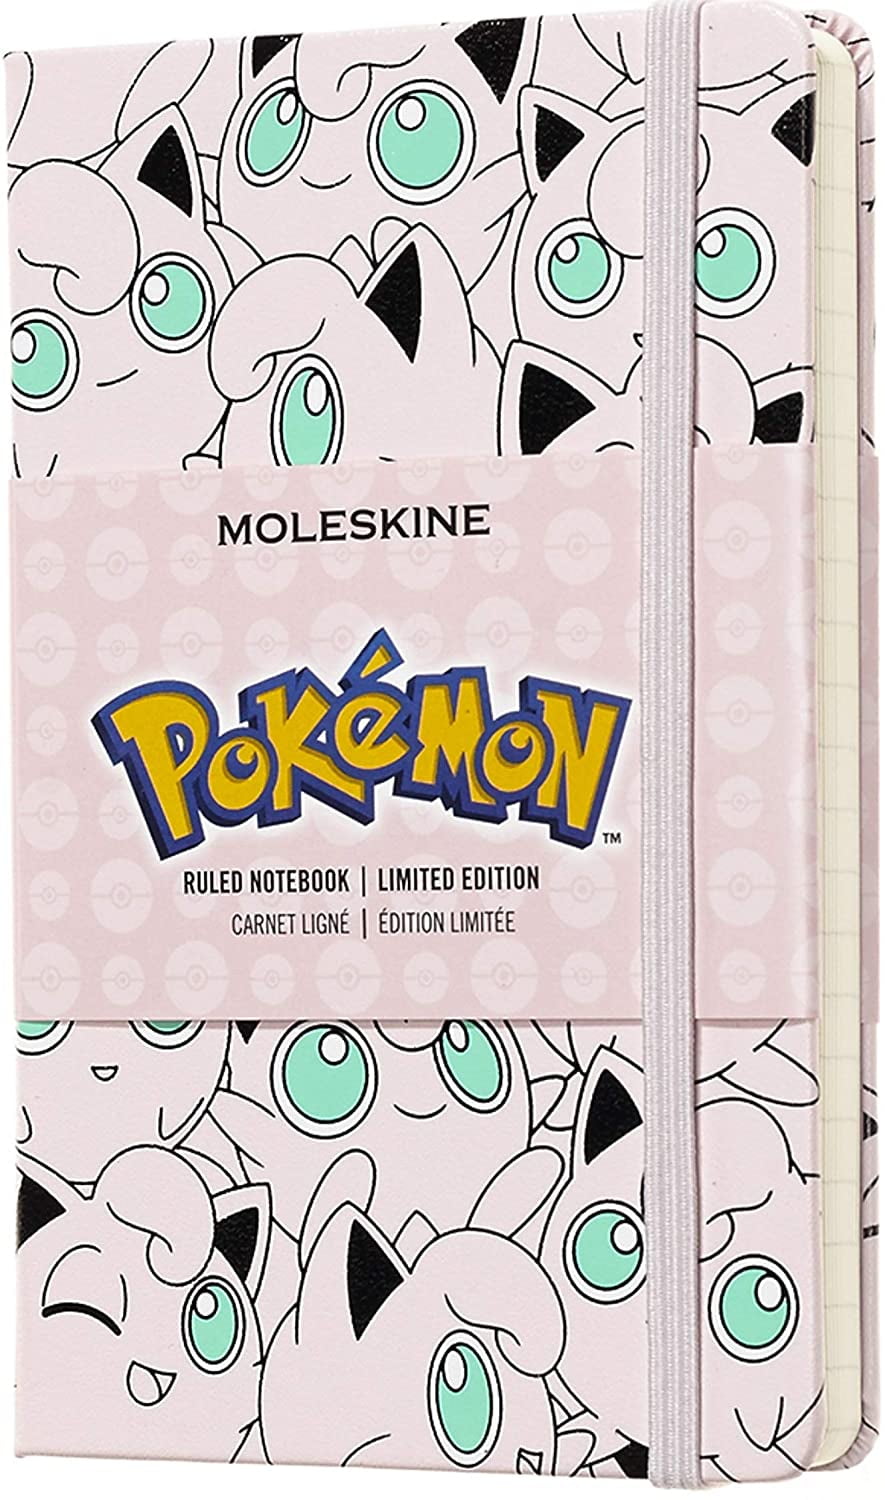 Moleskine Limited Edition Pokémon Notebook Large Hard Cover 5 x 8.25 Ruled/Lined 